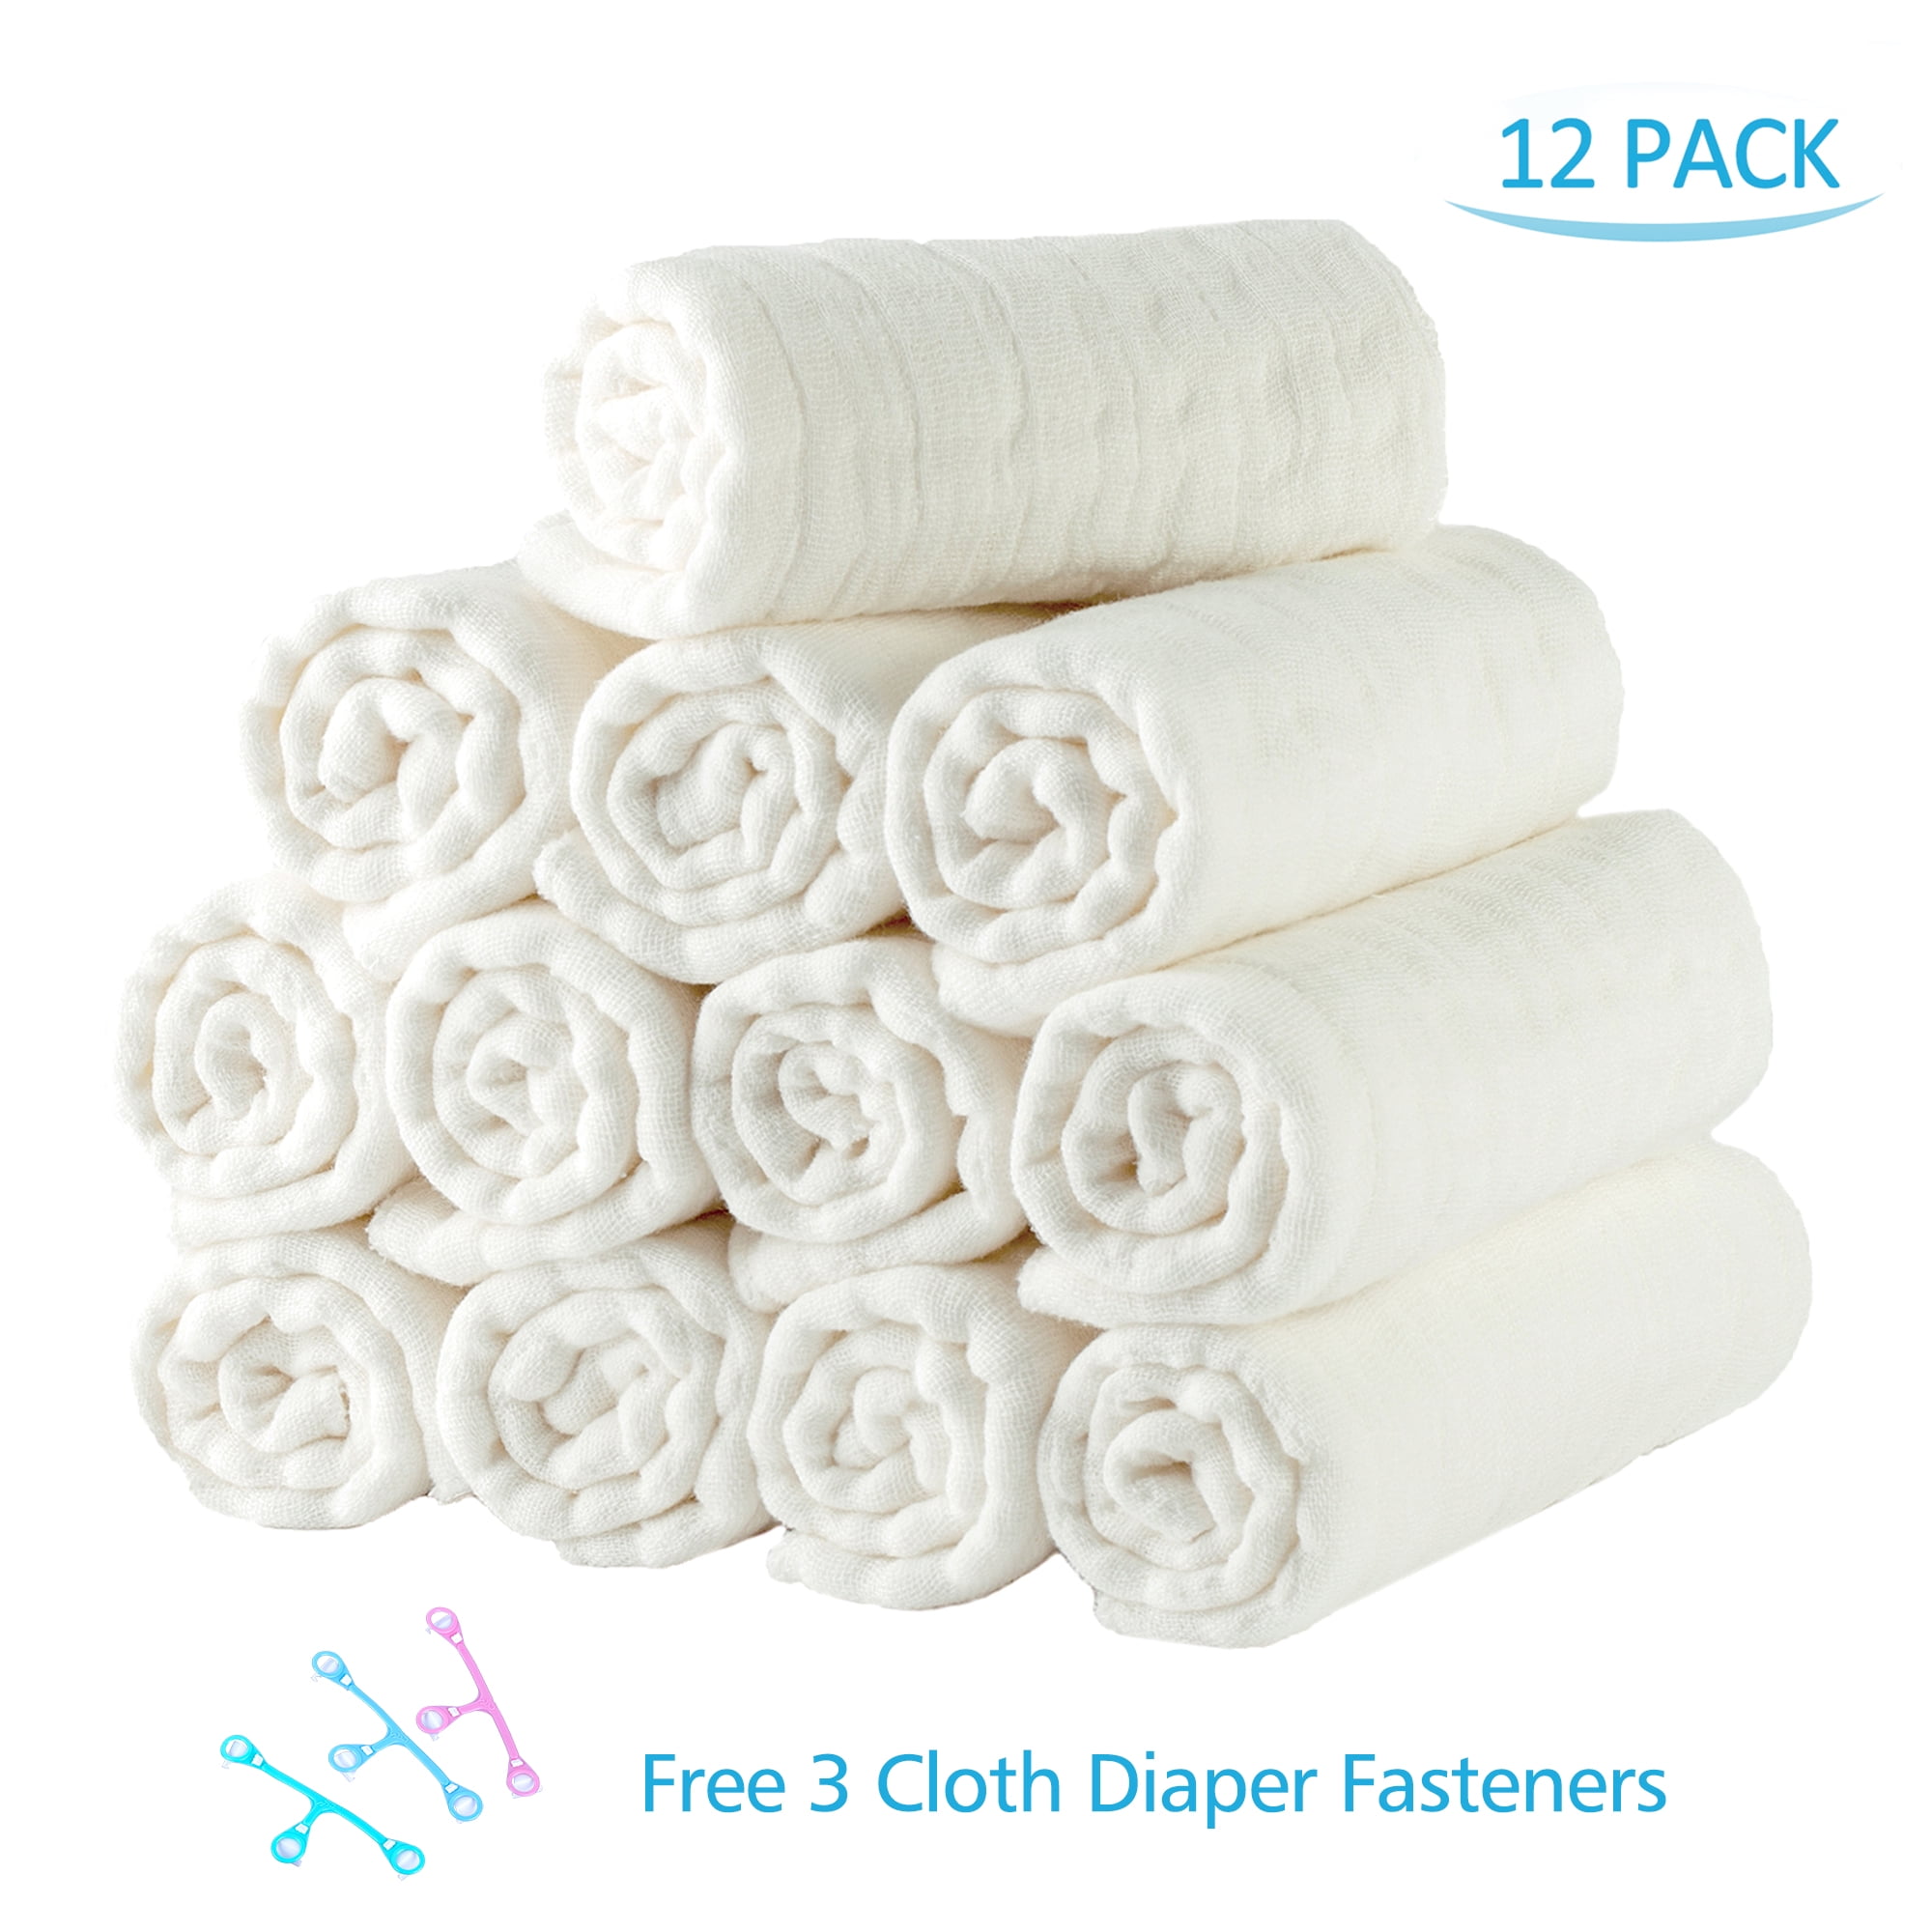 12 X PREMIUM  QUALITY BABY TERRY TOWELLING NAPPIES SUPER SOFT,100% COTTON 